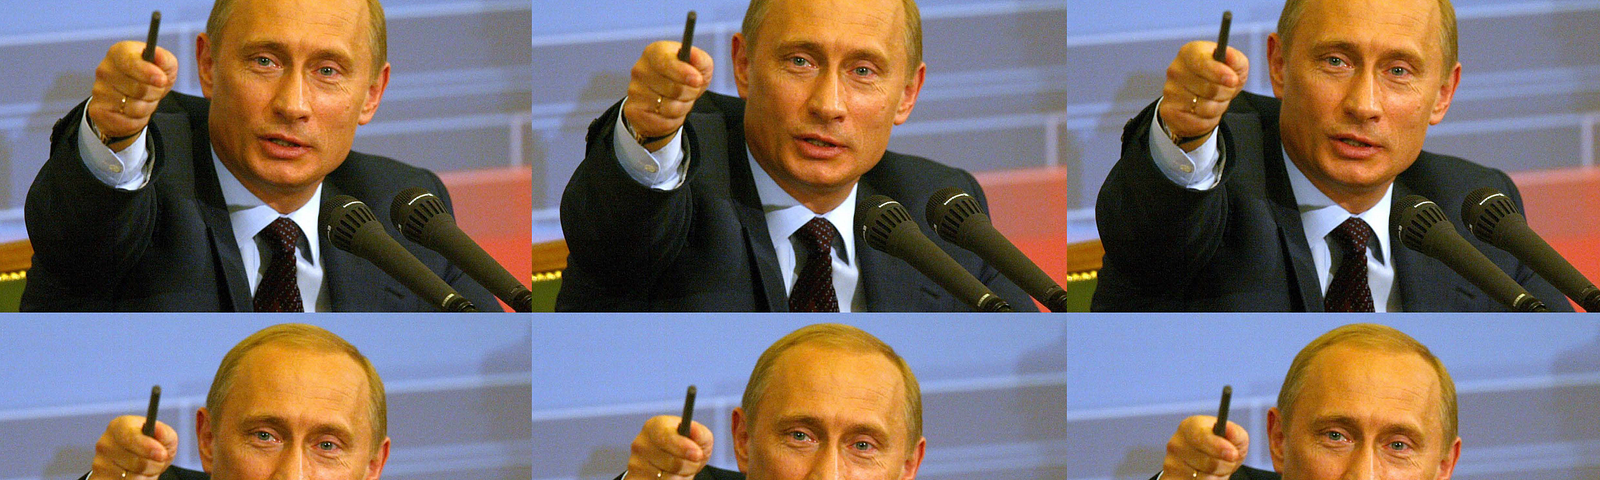 Constructed image of six repeat images, six photos stacked in a grid, two rows of three images each, all the same photo of Vladimir Putin pointing with a pen in his hand, extending his arm out in front of him and up into the air like he’s stabbing something or pointing ‘onward’ (or exuberantly pointing to a reporter in the back of the room, enjoying his celebrity), while he is seated at a table, in front of microphones. Original photo from the kremlin.ru